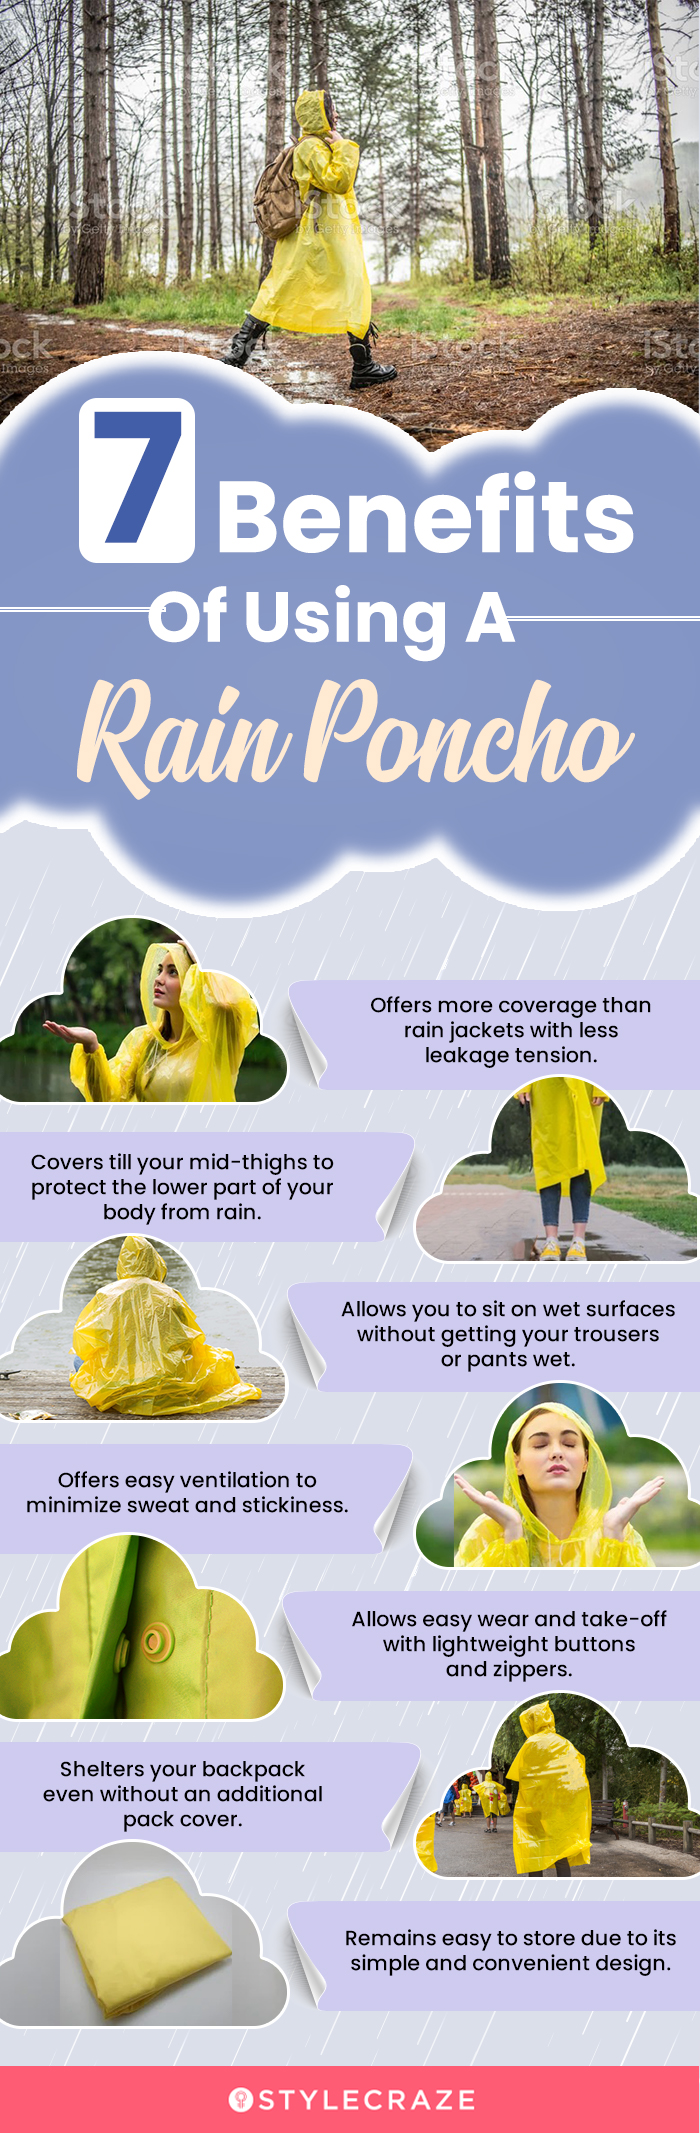 7 Benefits Of Using A Rain Poncho (infographic)